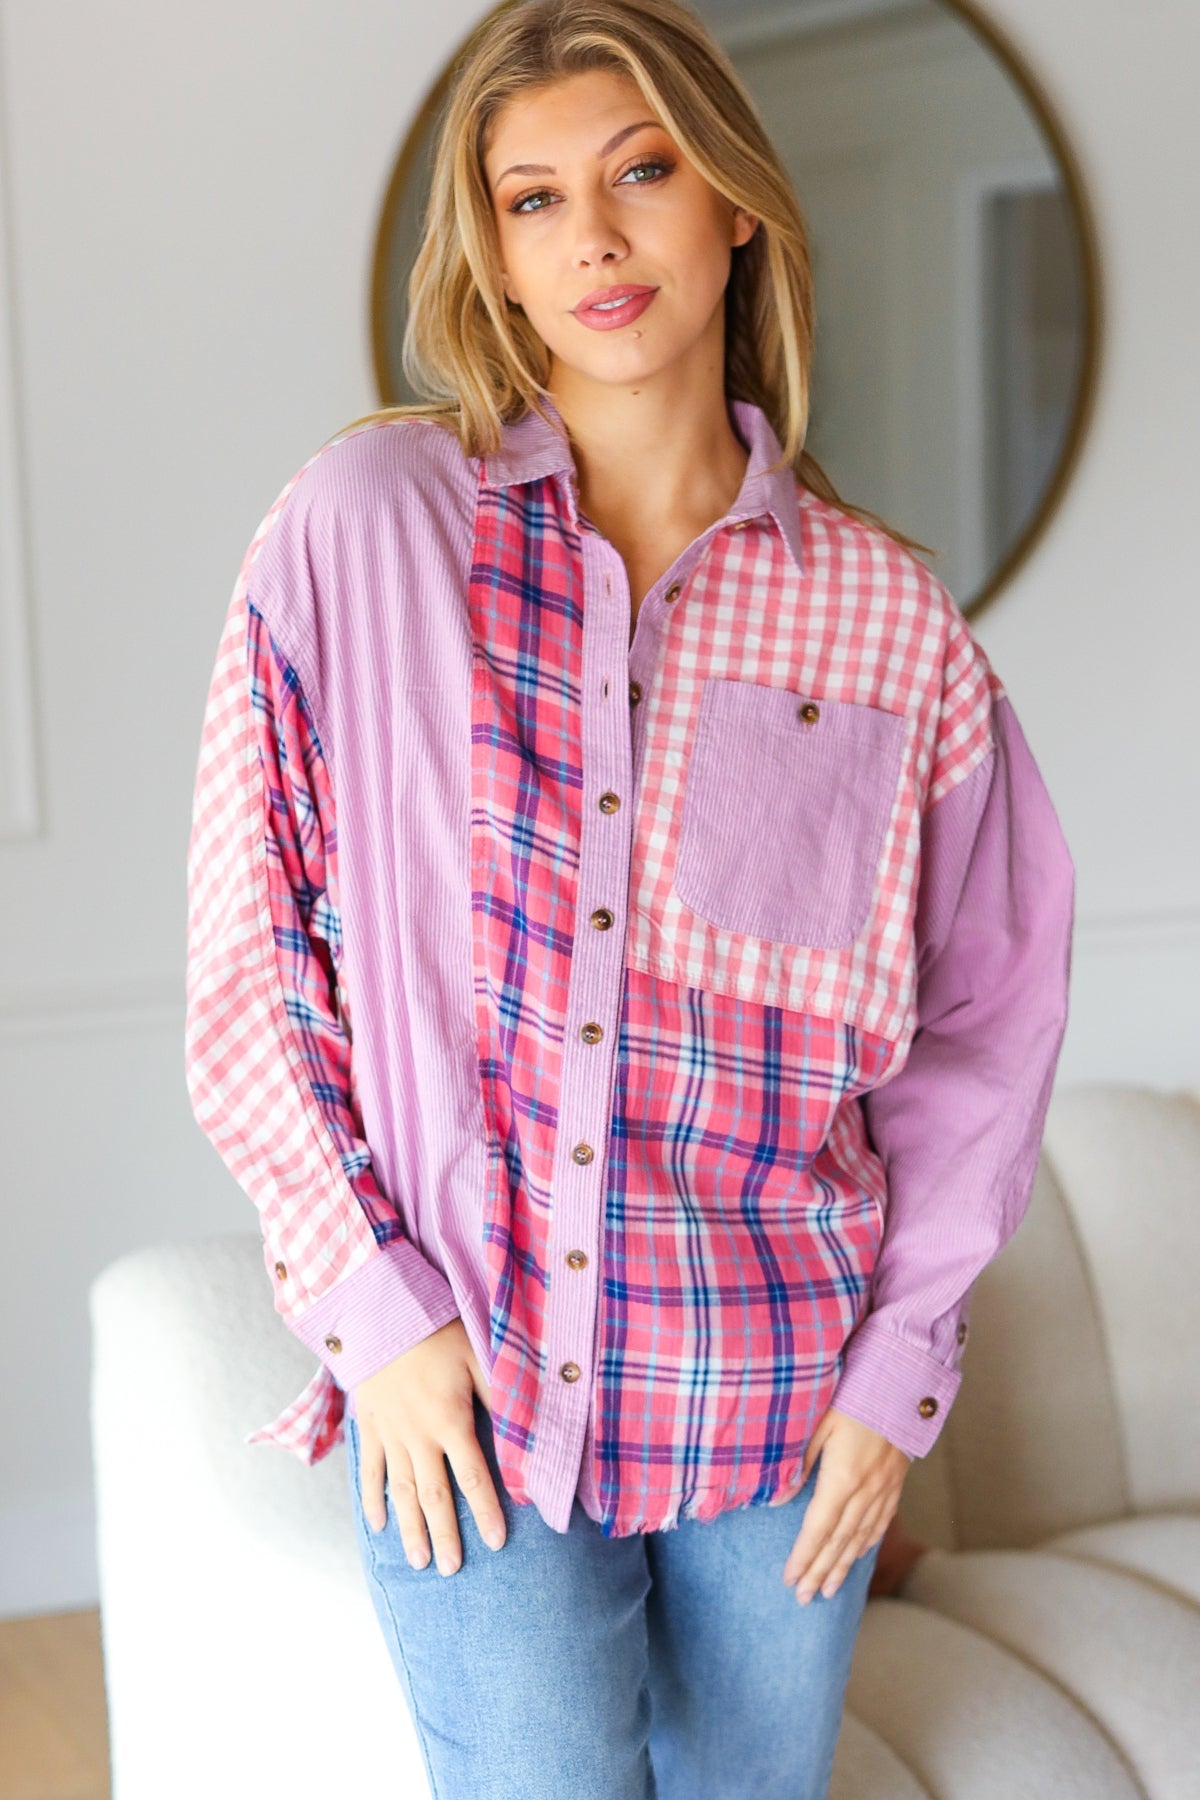 Everyday Bliss Pink & Navy Plaid Color Block Button Down Top